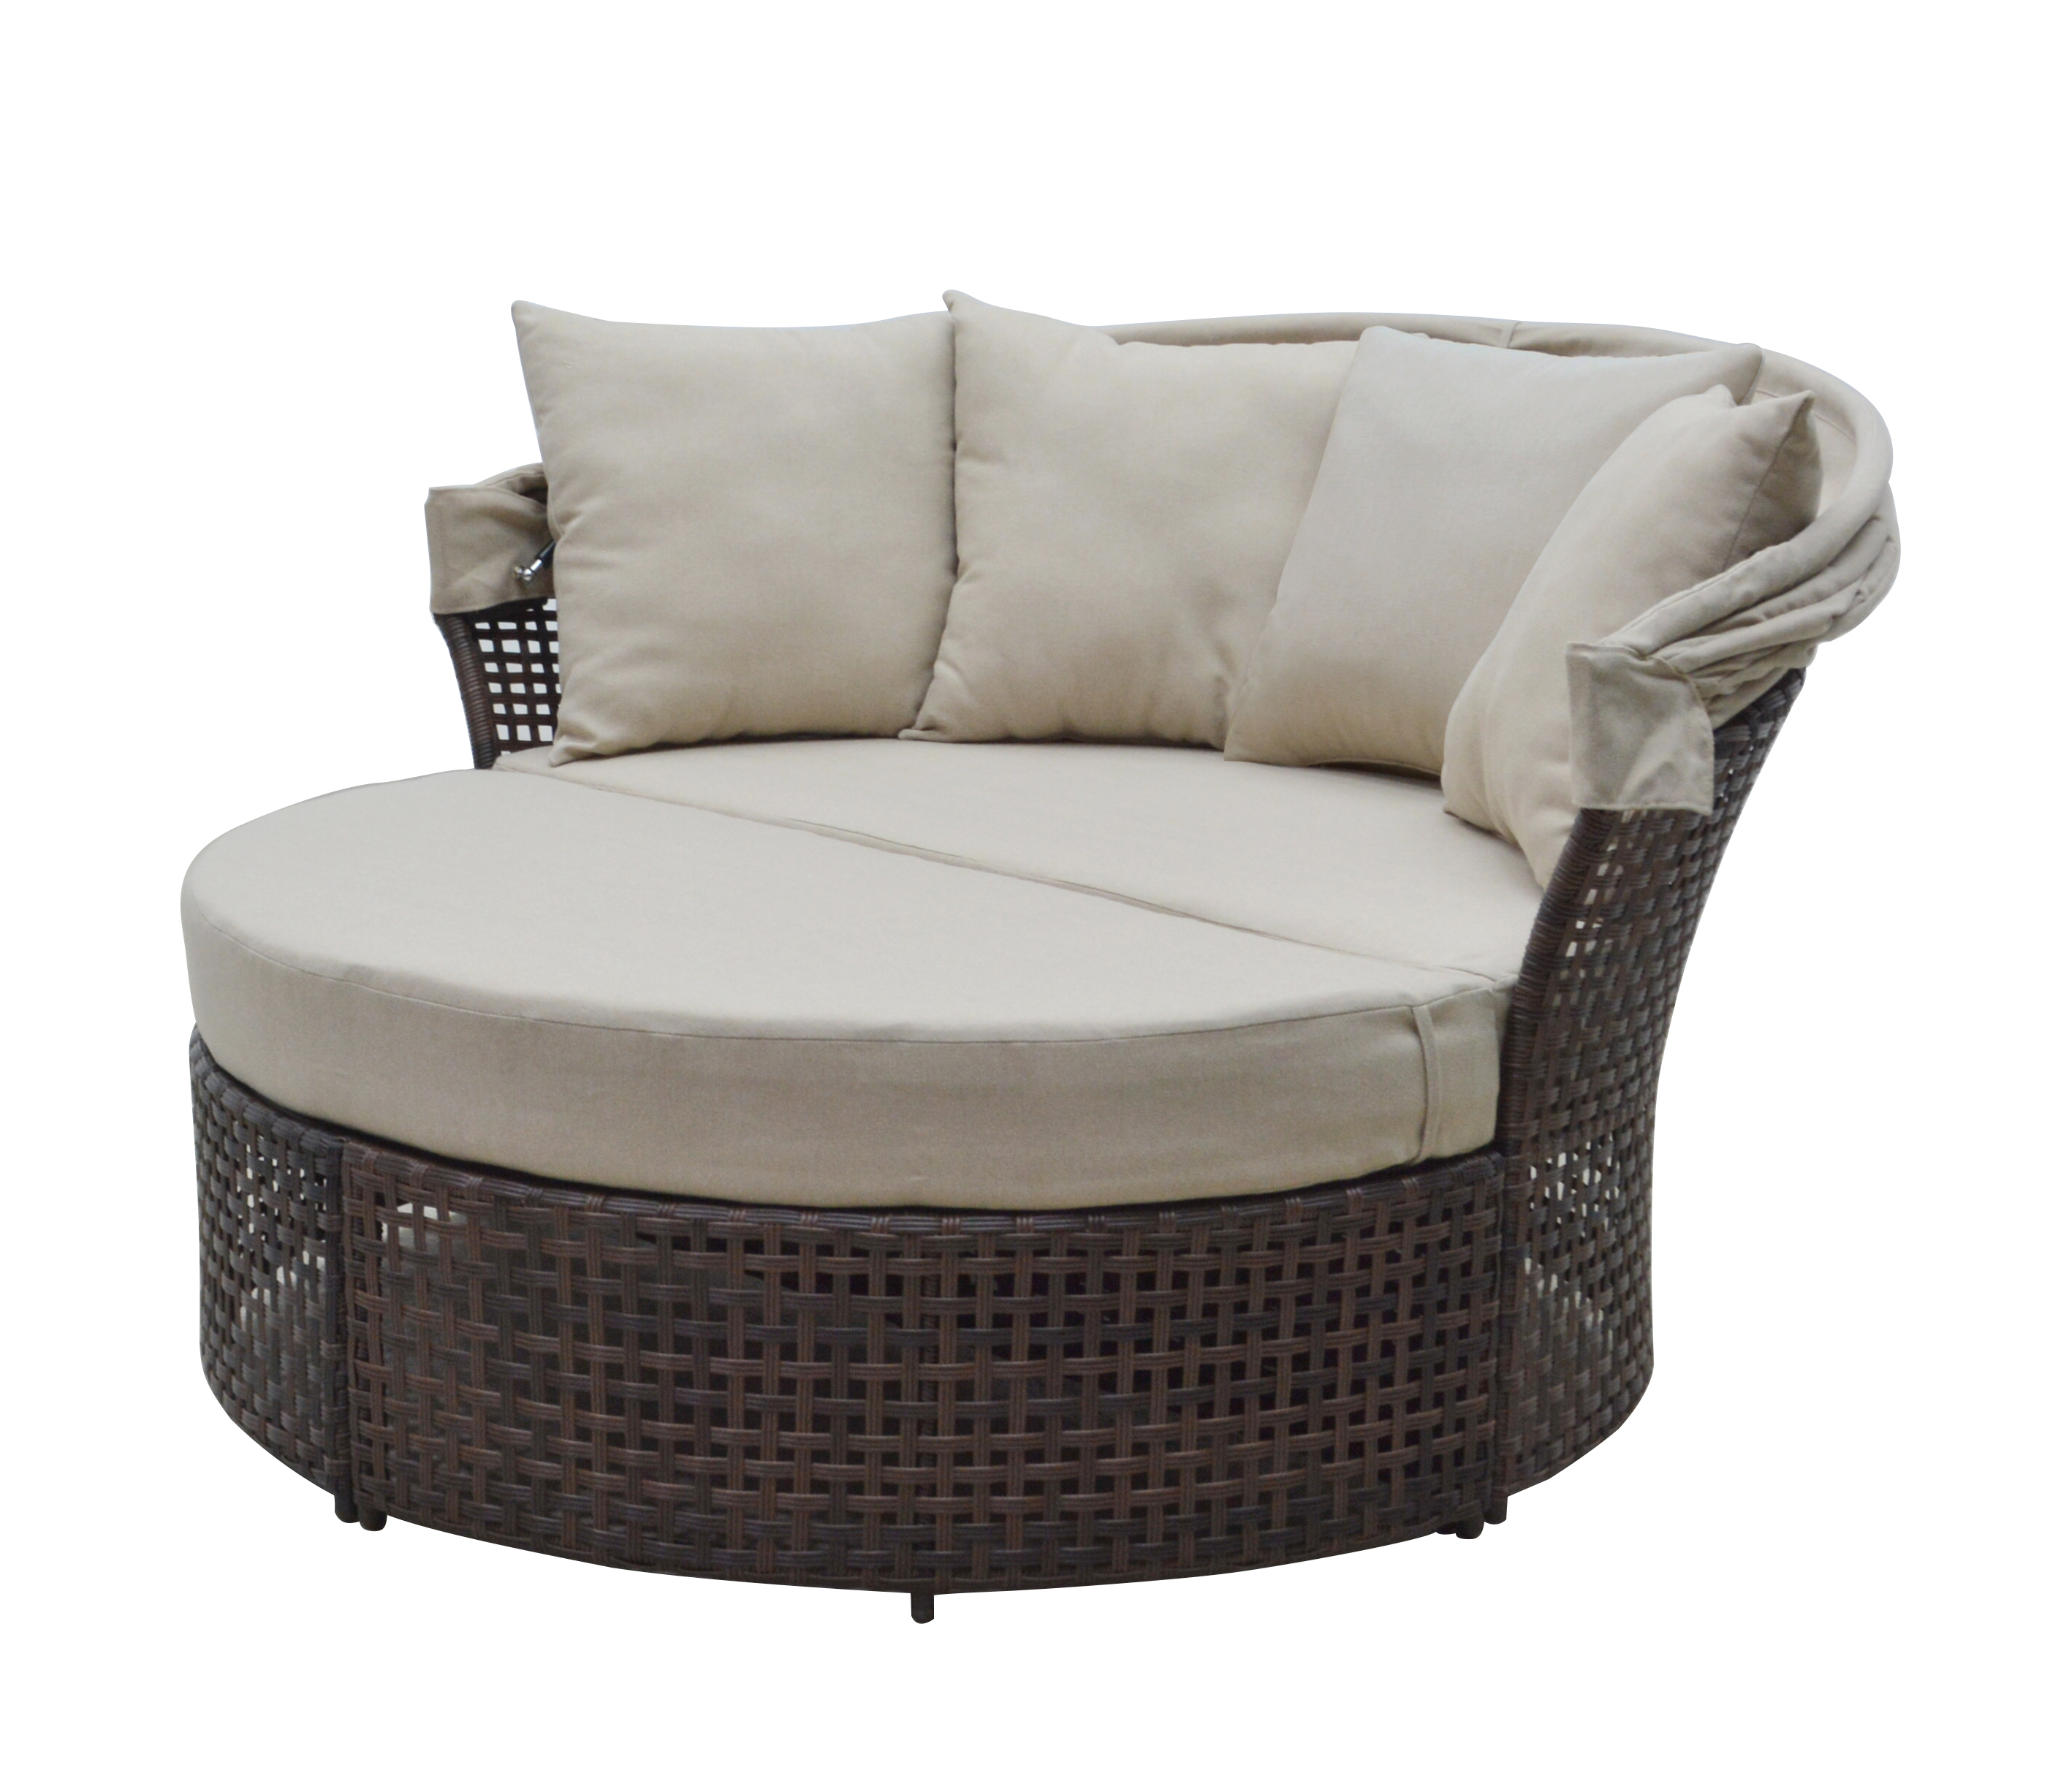 Mainstays Tuscany Ridge 2-Piece Outdoor Daybed with Retractable Canopy, Beige - image 3 of 10